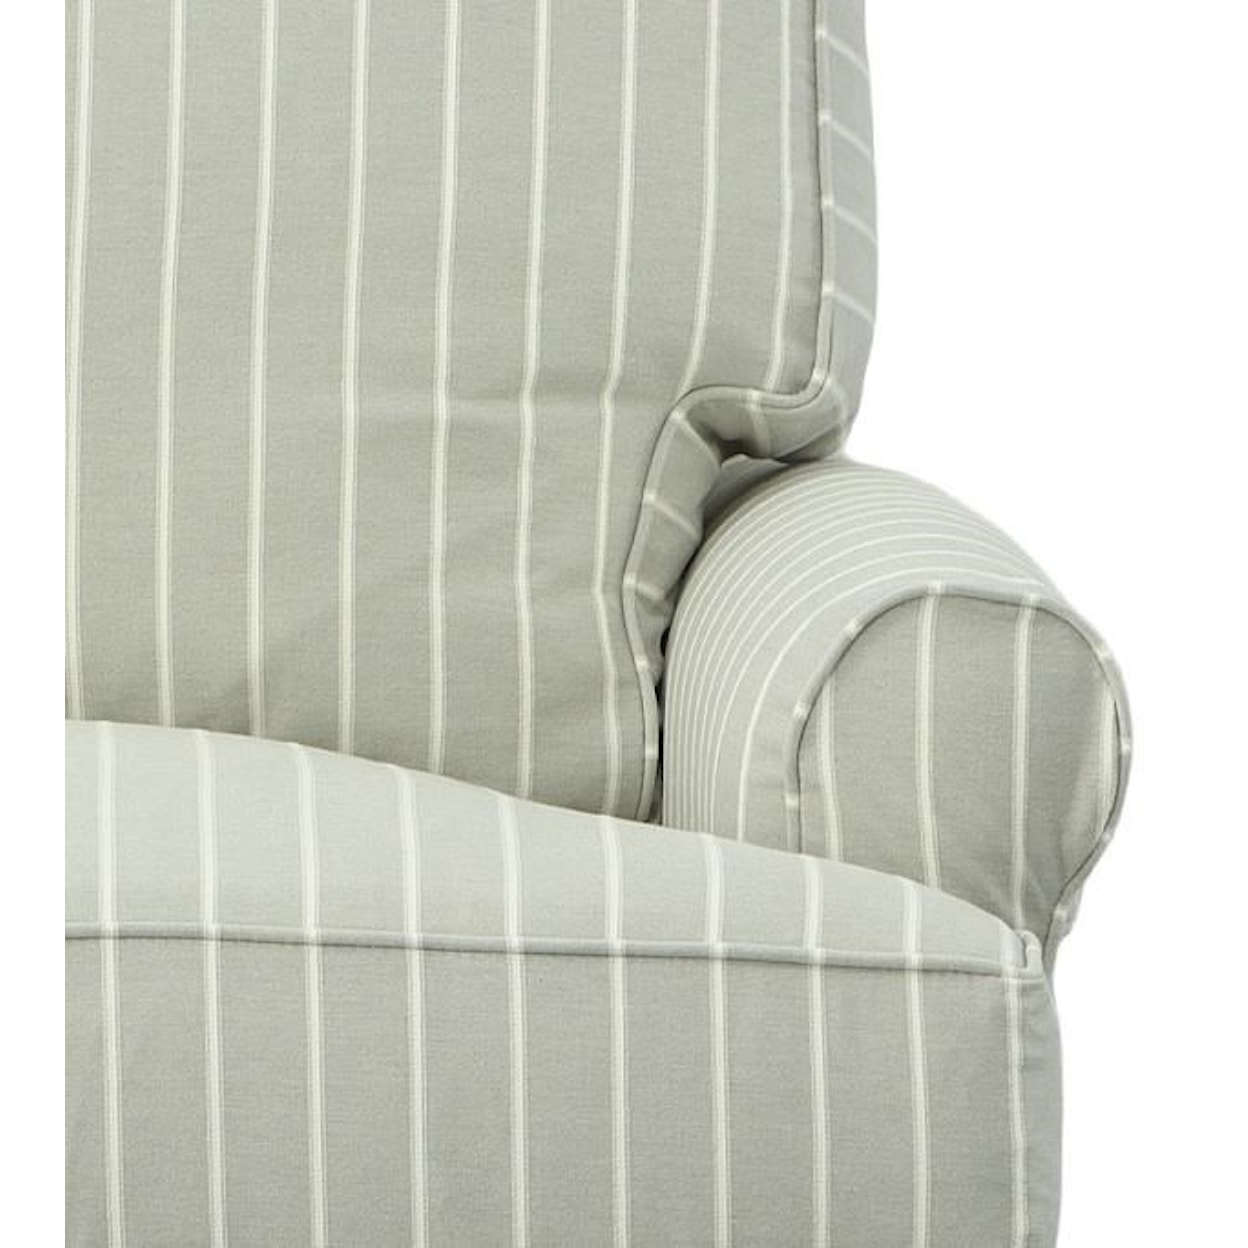 Four Seasons Furniture Accent Chairs Hayes Swivel Glider